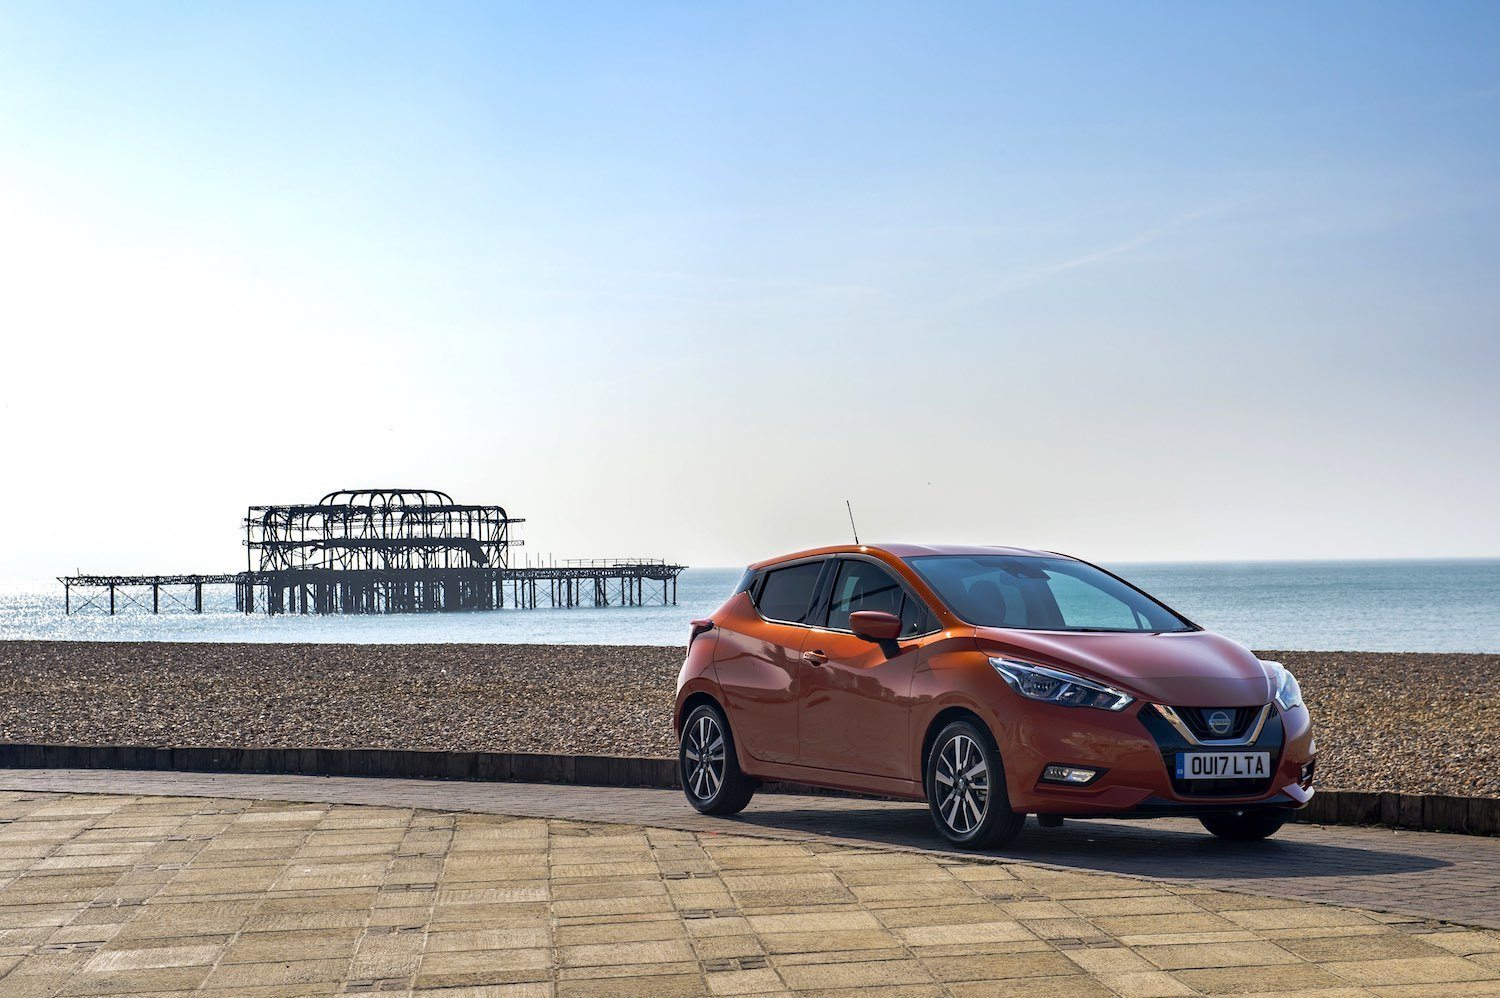 Tom Scanlan drives the All New Nissan Micra 8